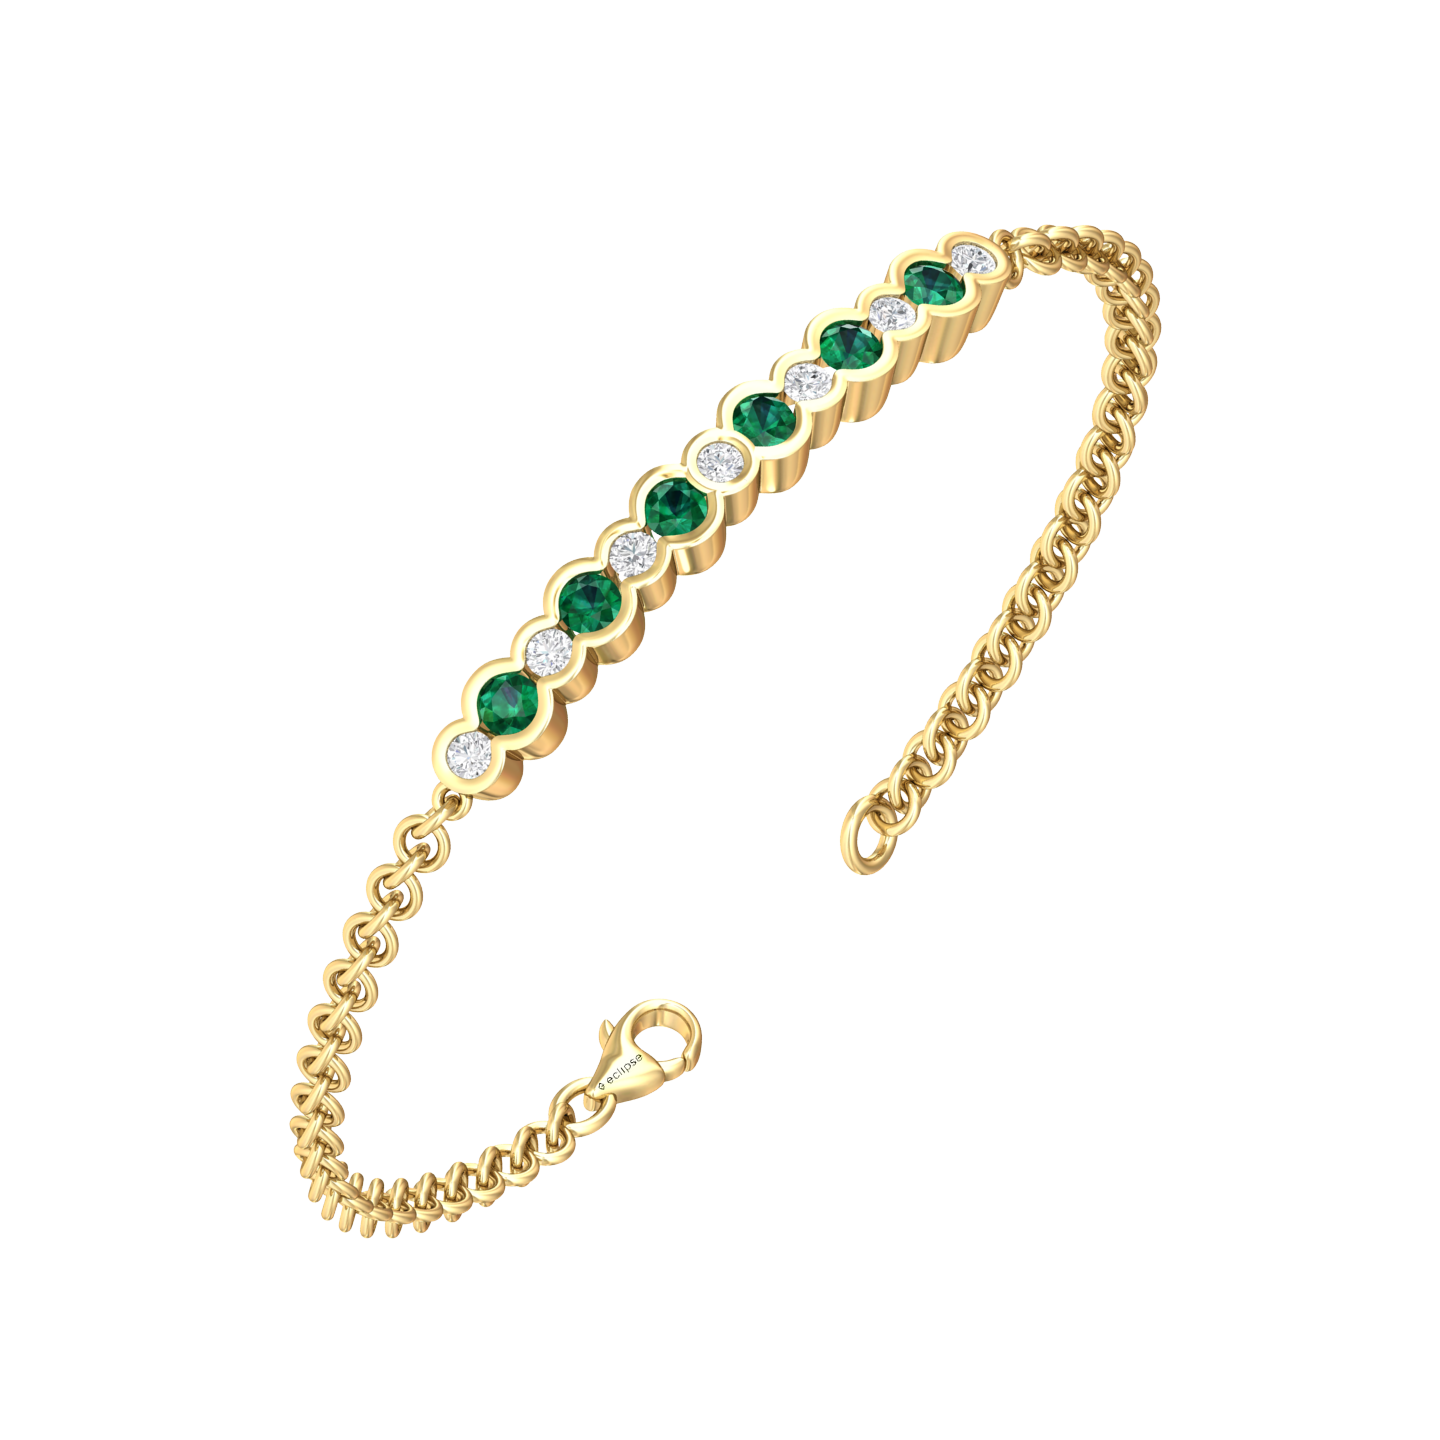 Eclipse Collection Emerald and Diamond Bracelet  Gardiner Brothers 18ct Yellow Gold  